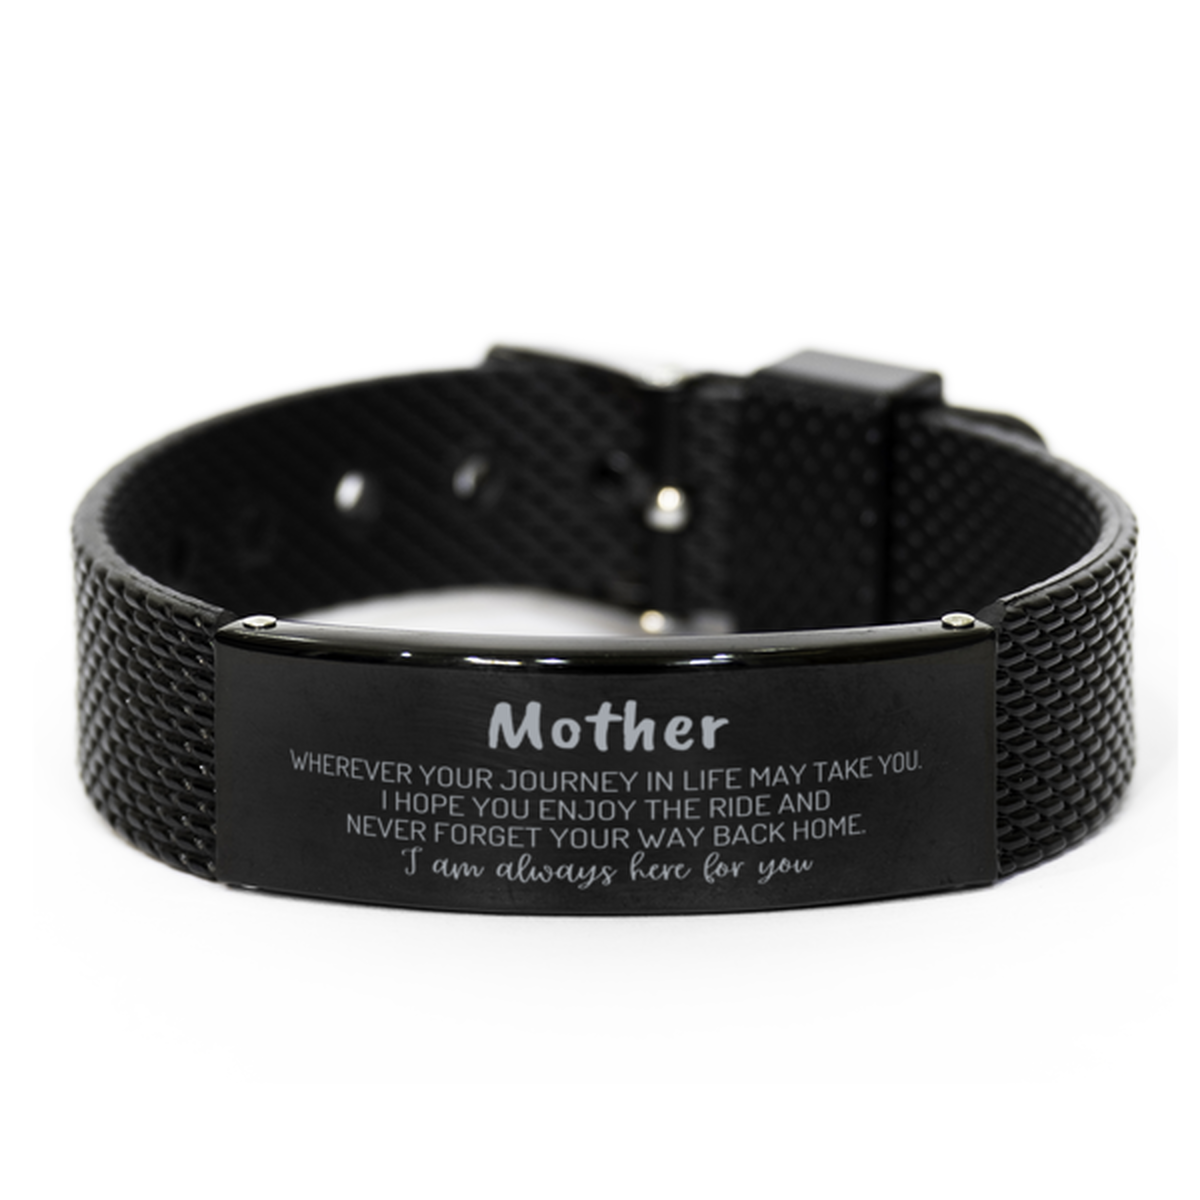 Mother wherever your journey in life may take you, I am always here for you Mother Black Shark Mesh Bracelet, Awesome Christmas Gifts For Mother, Mother Birthday Gifts for Men Women Family Loved One